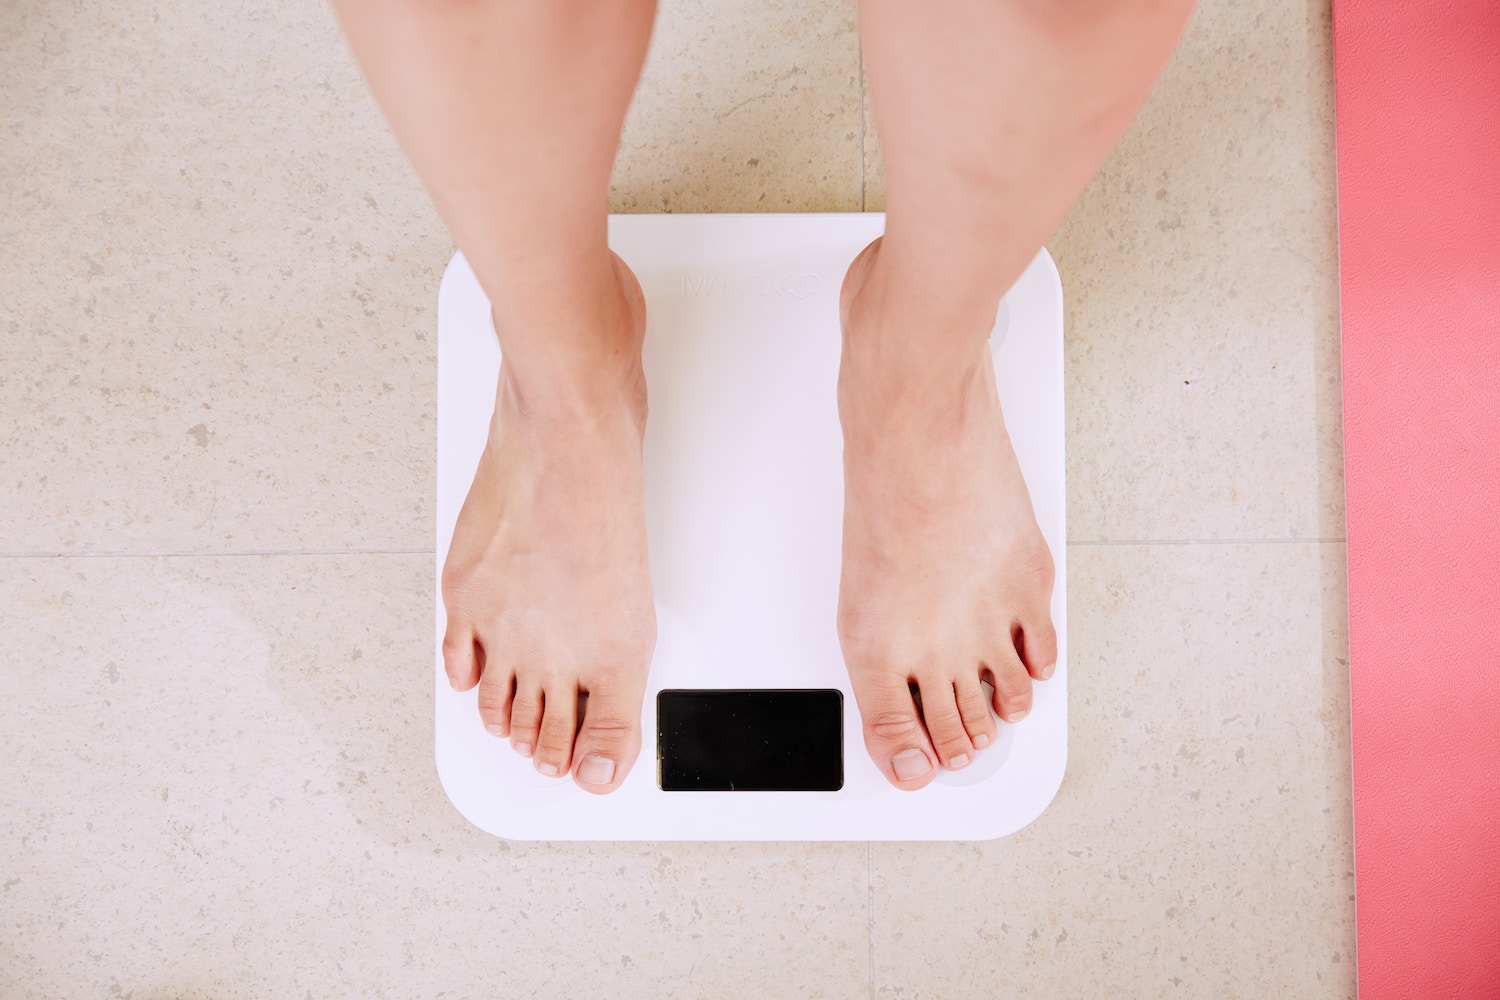 We've got all the best tips and tricks for the right way to do a cleanse weight loss.